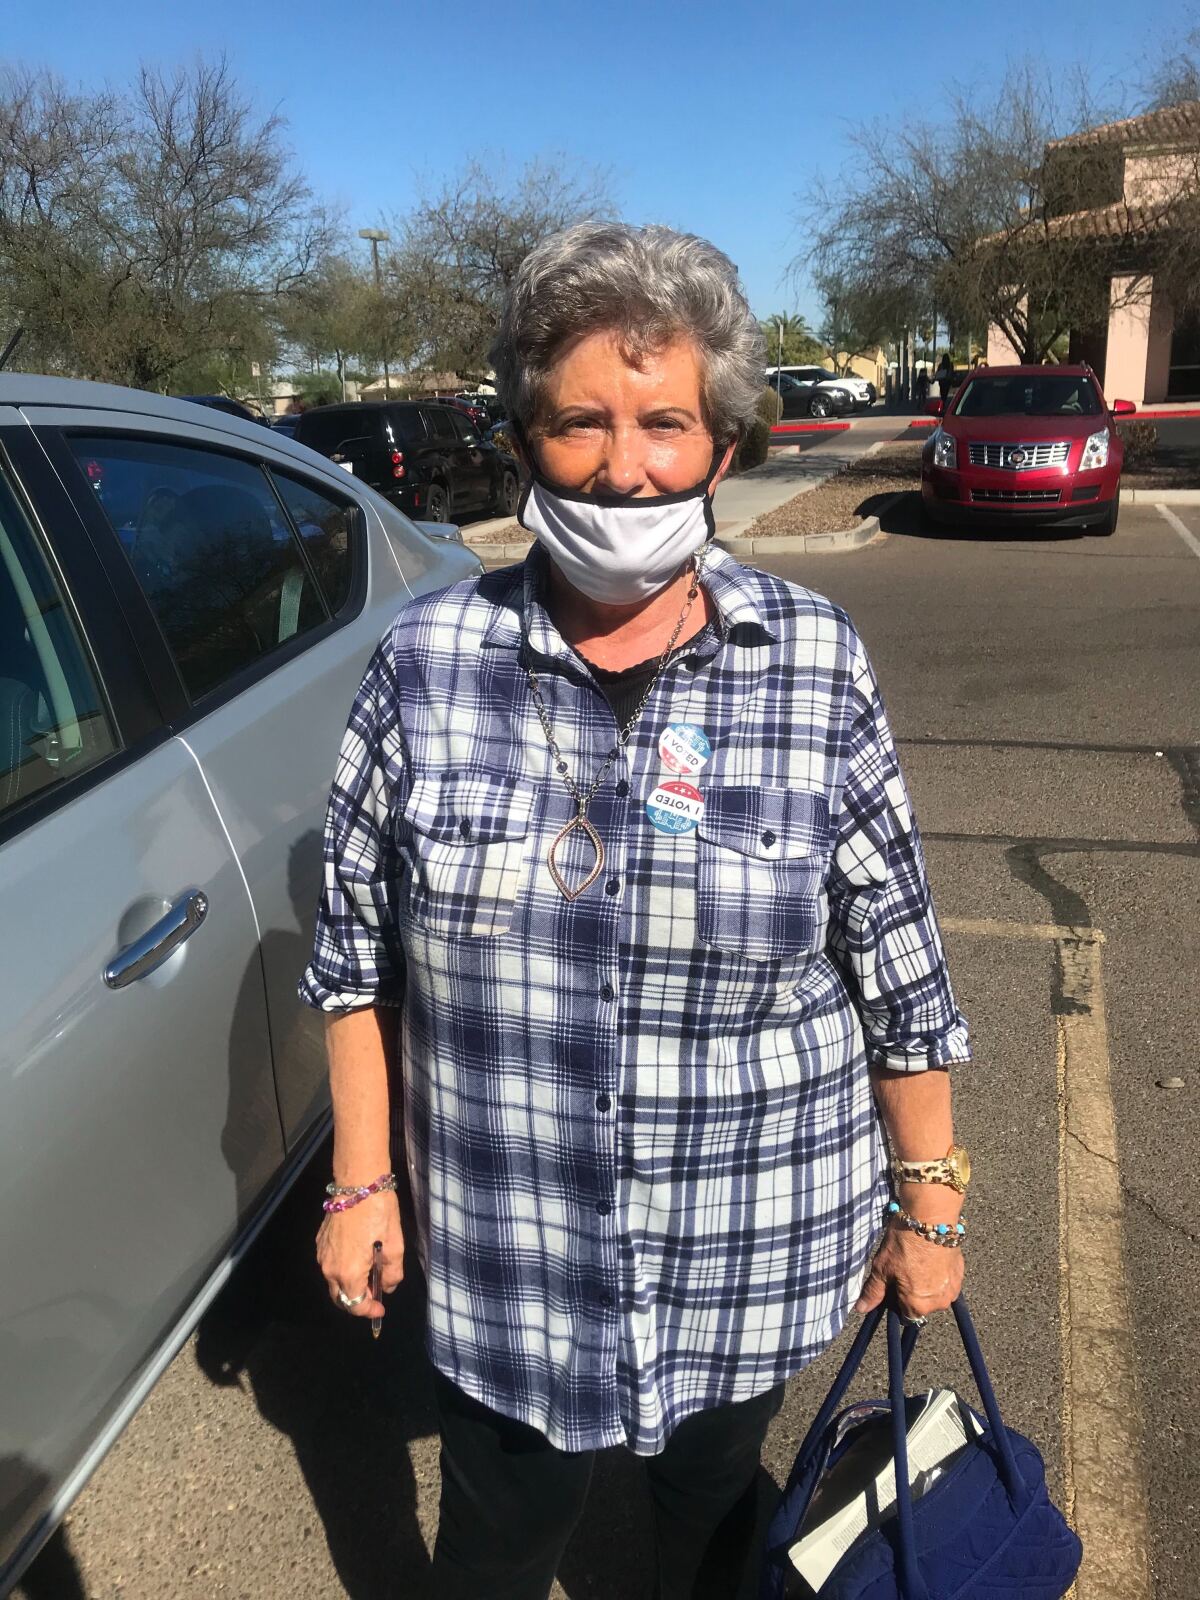 Linda Cottrell stands in a parking lot after voting in Arizona.